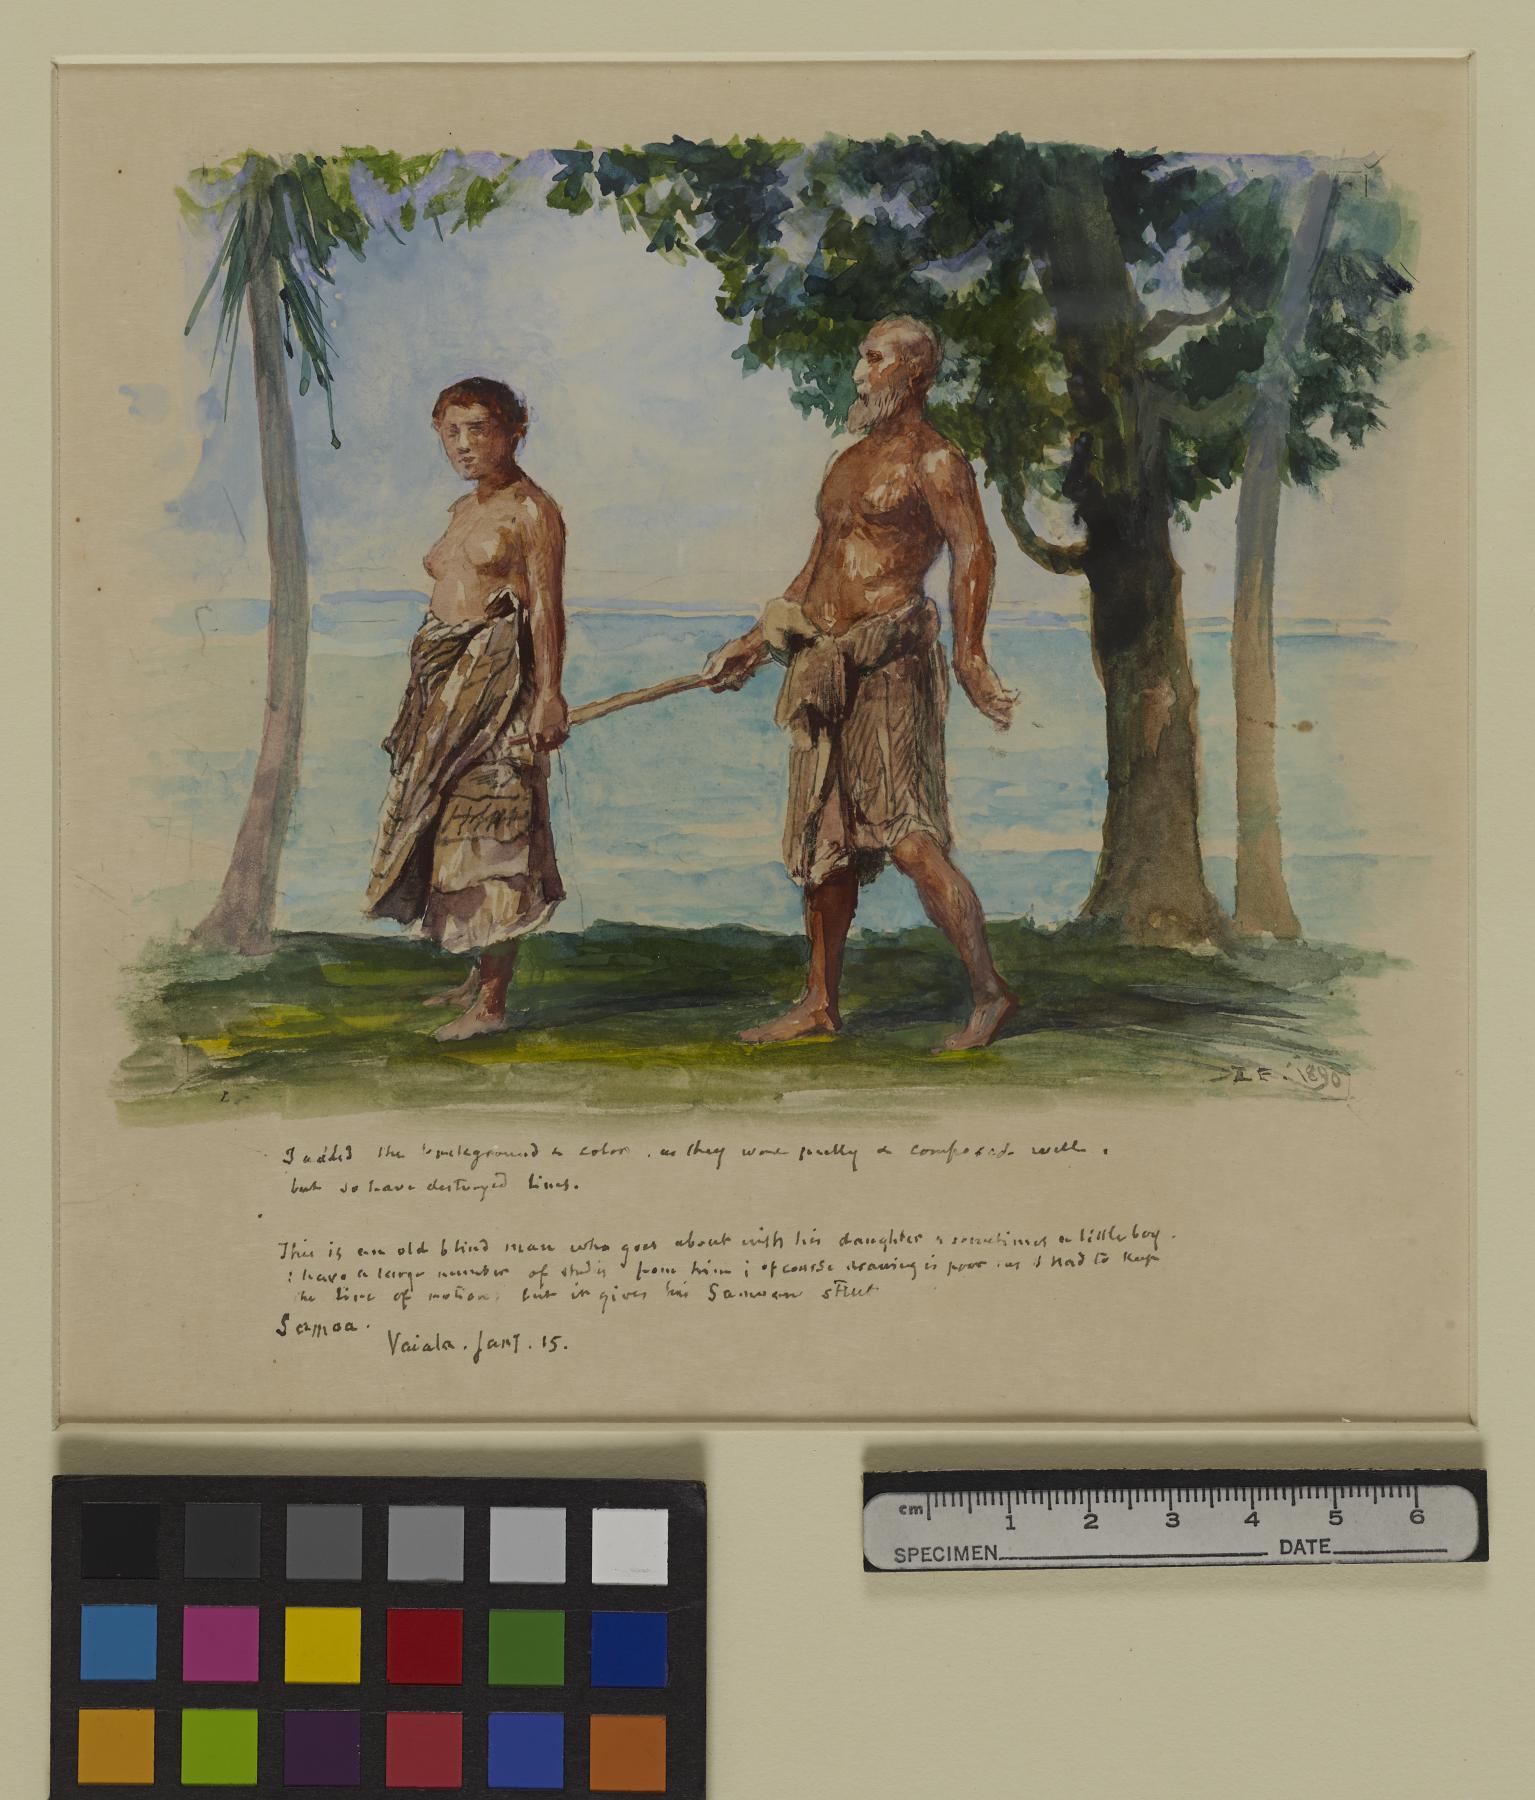 Image for Blind Man and His Daughter, Vaiala, Samoa